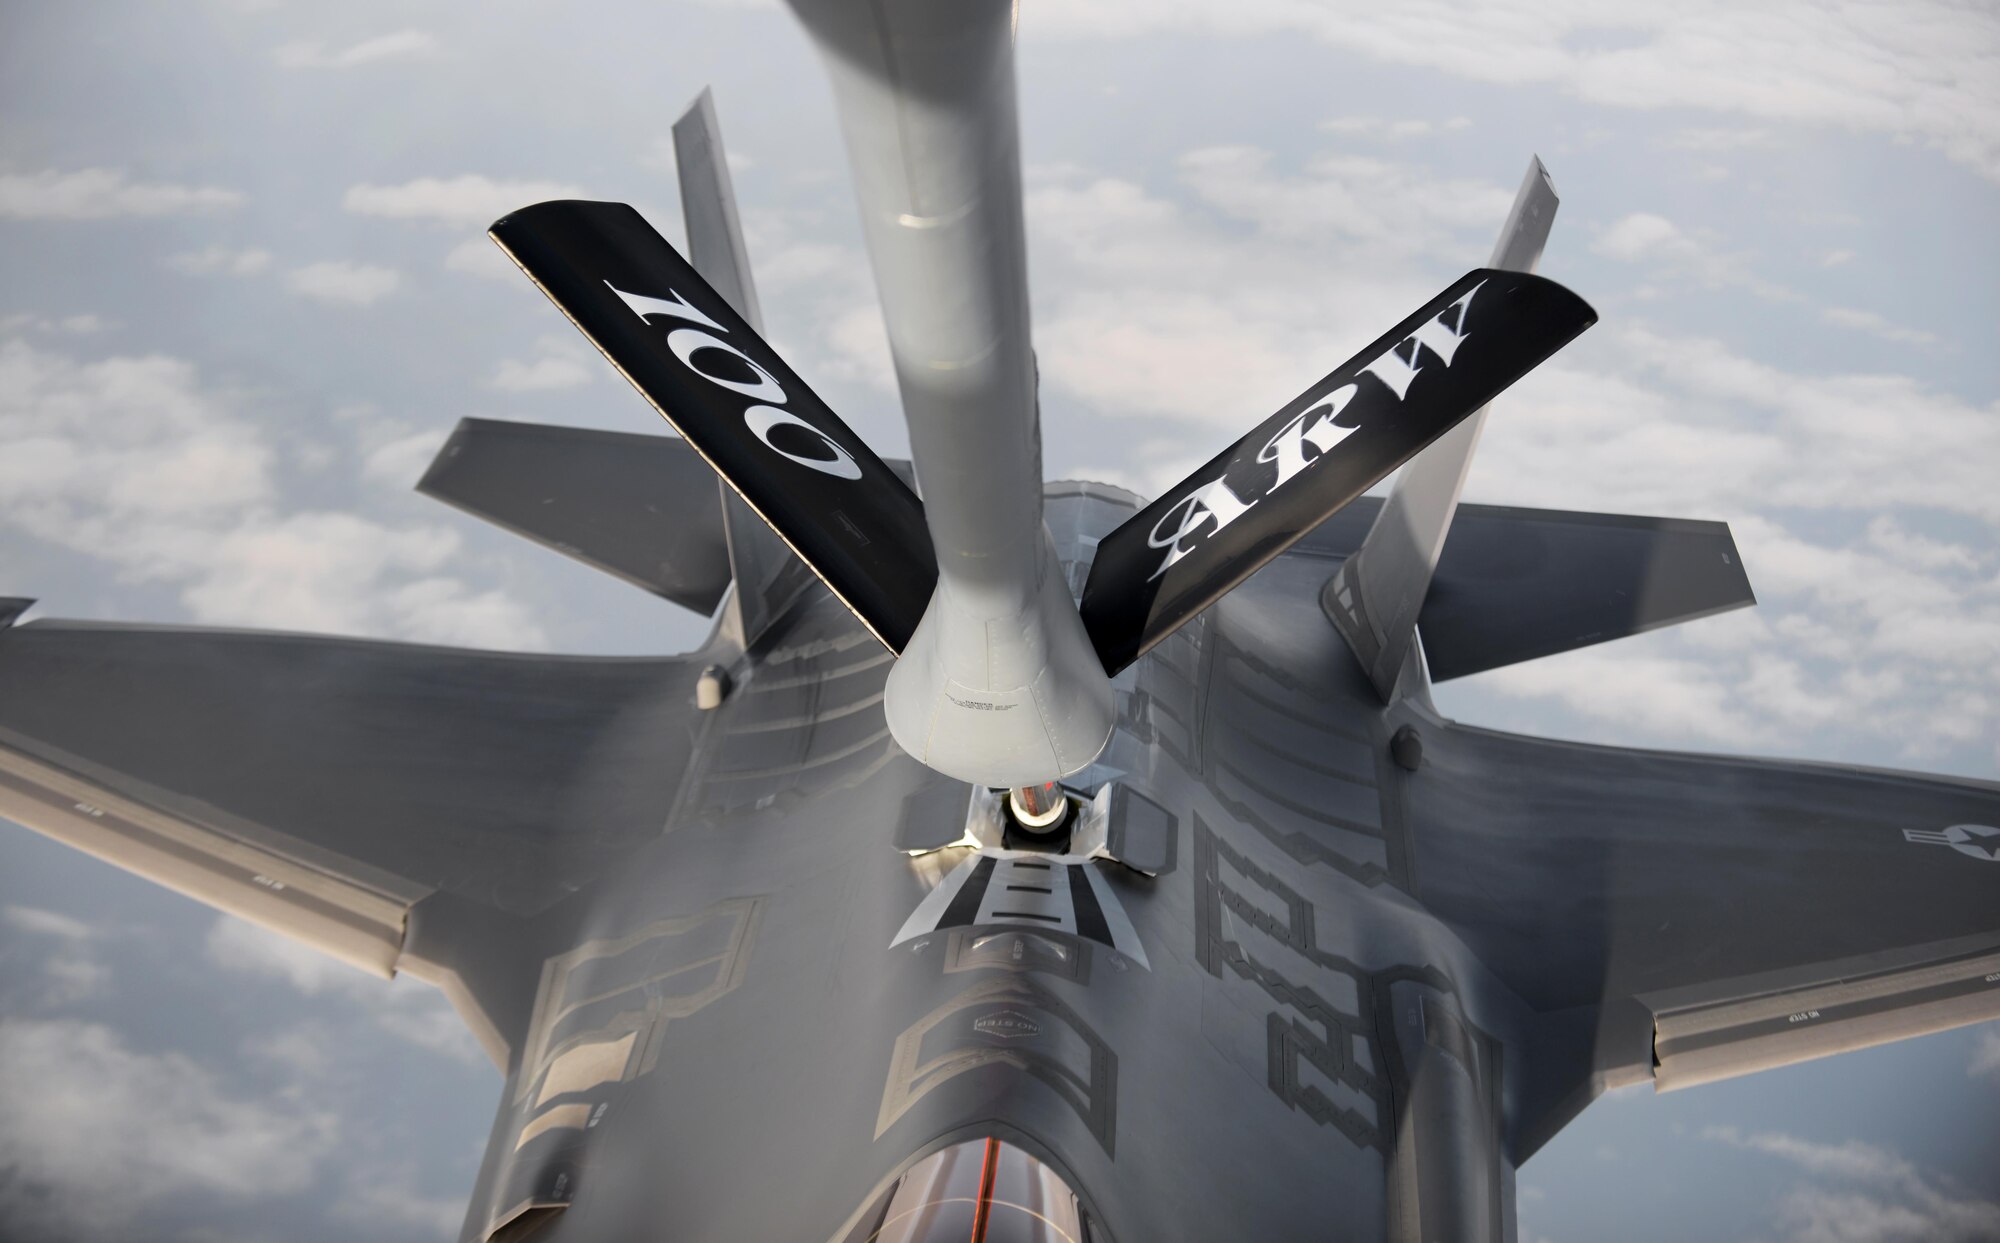 An F-35A Lightning II receives fuel from a 100th Air Refueling Wing KC-135 Stratotanker over the Atlantic Ocean April 15, 2017. The F-35As are conducting their first overseas deployment during which they will conduct flying training with NATO partners. (U.S. Air Force photo by Airman 1st Class Tenley Long)